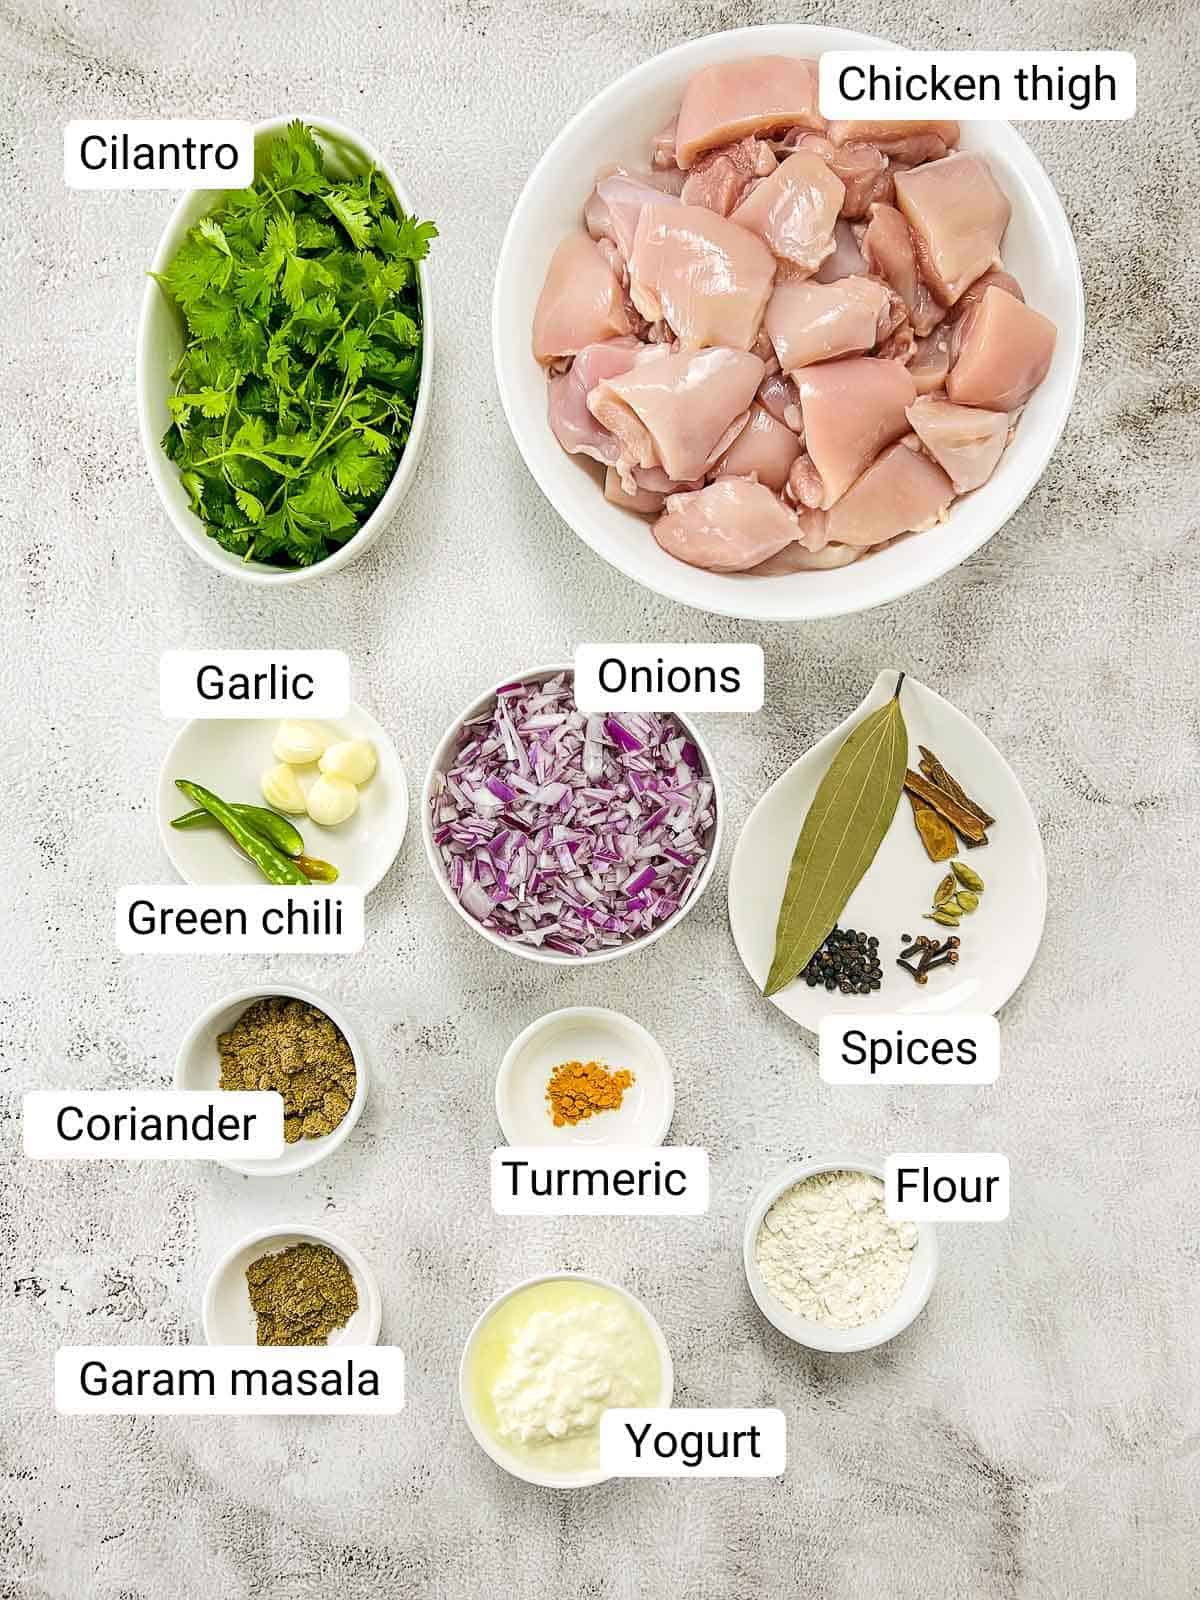 Ingredients to make cilantro chicken placed on a white surface.